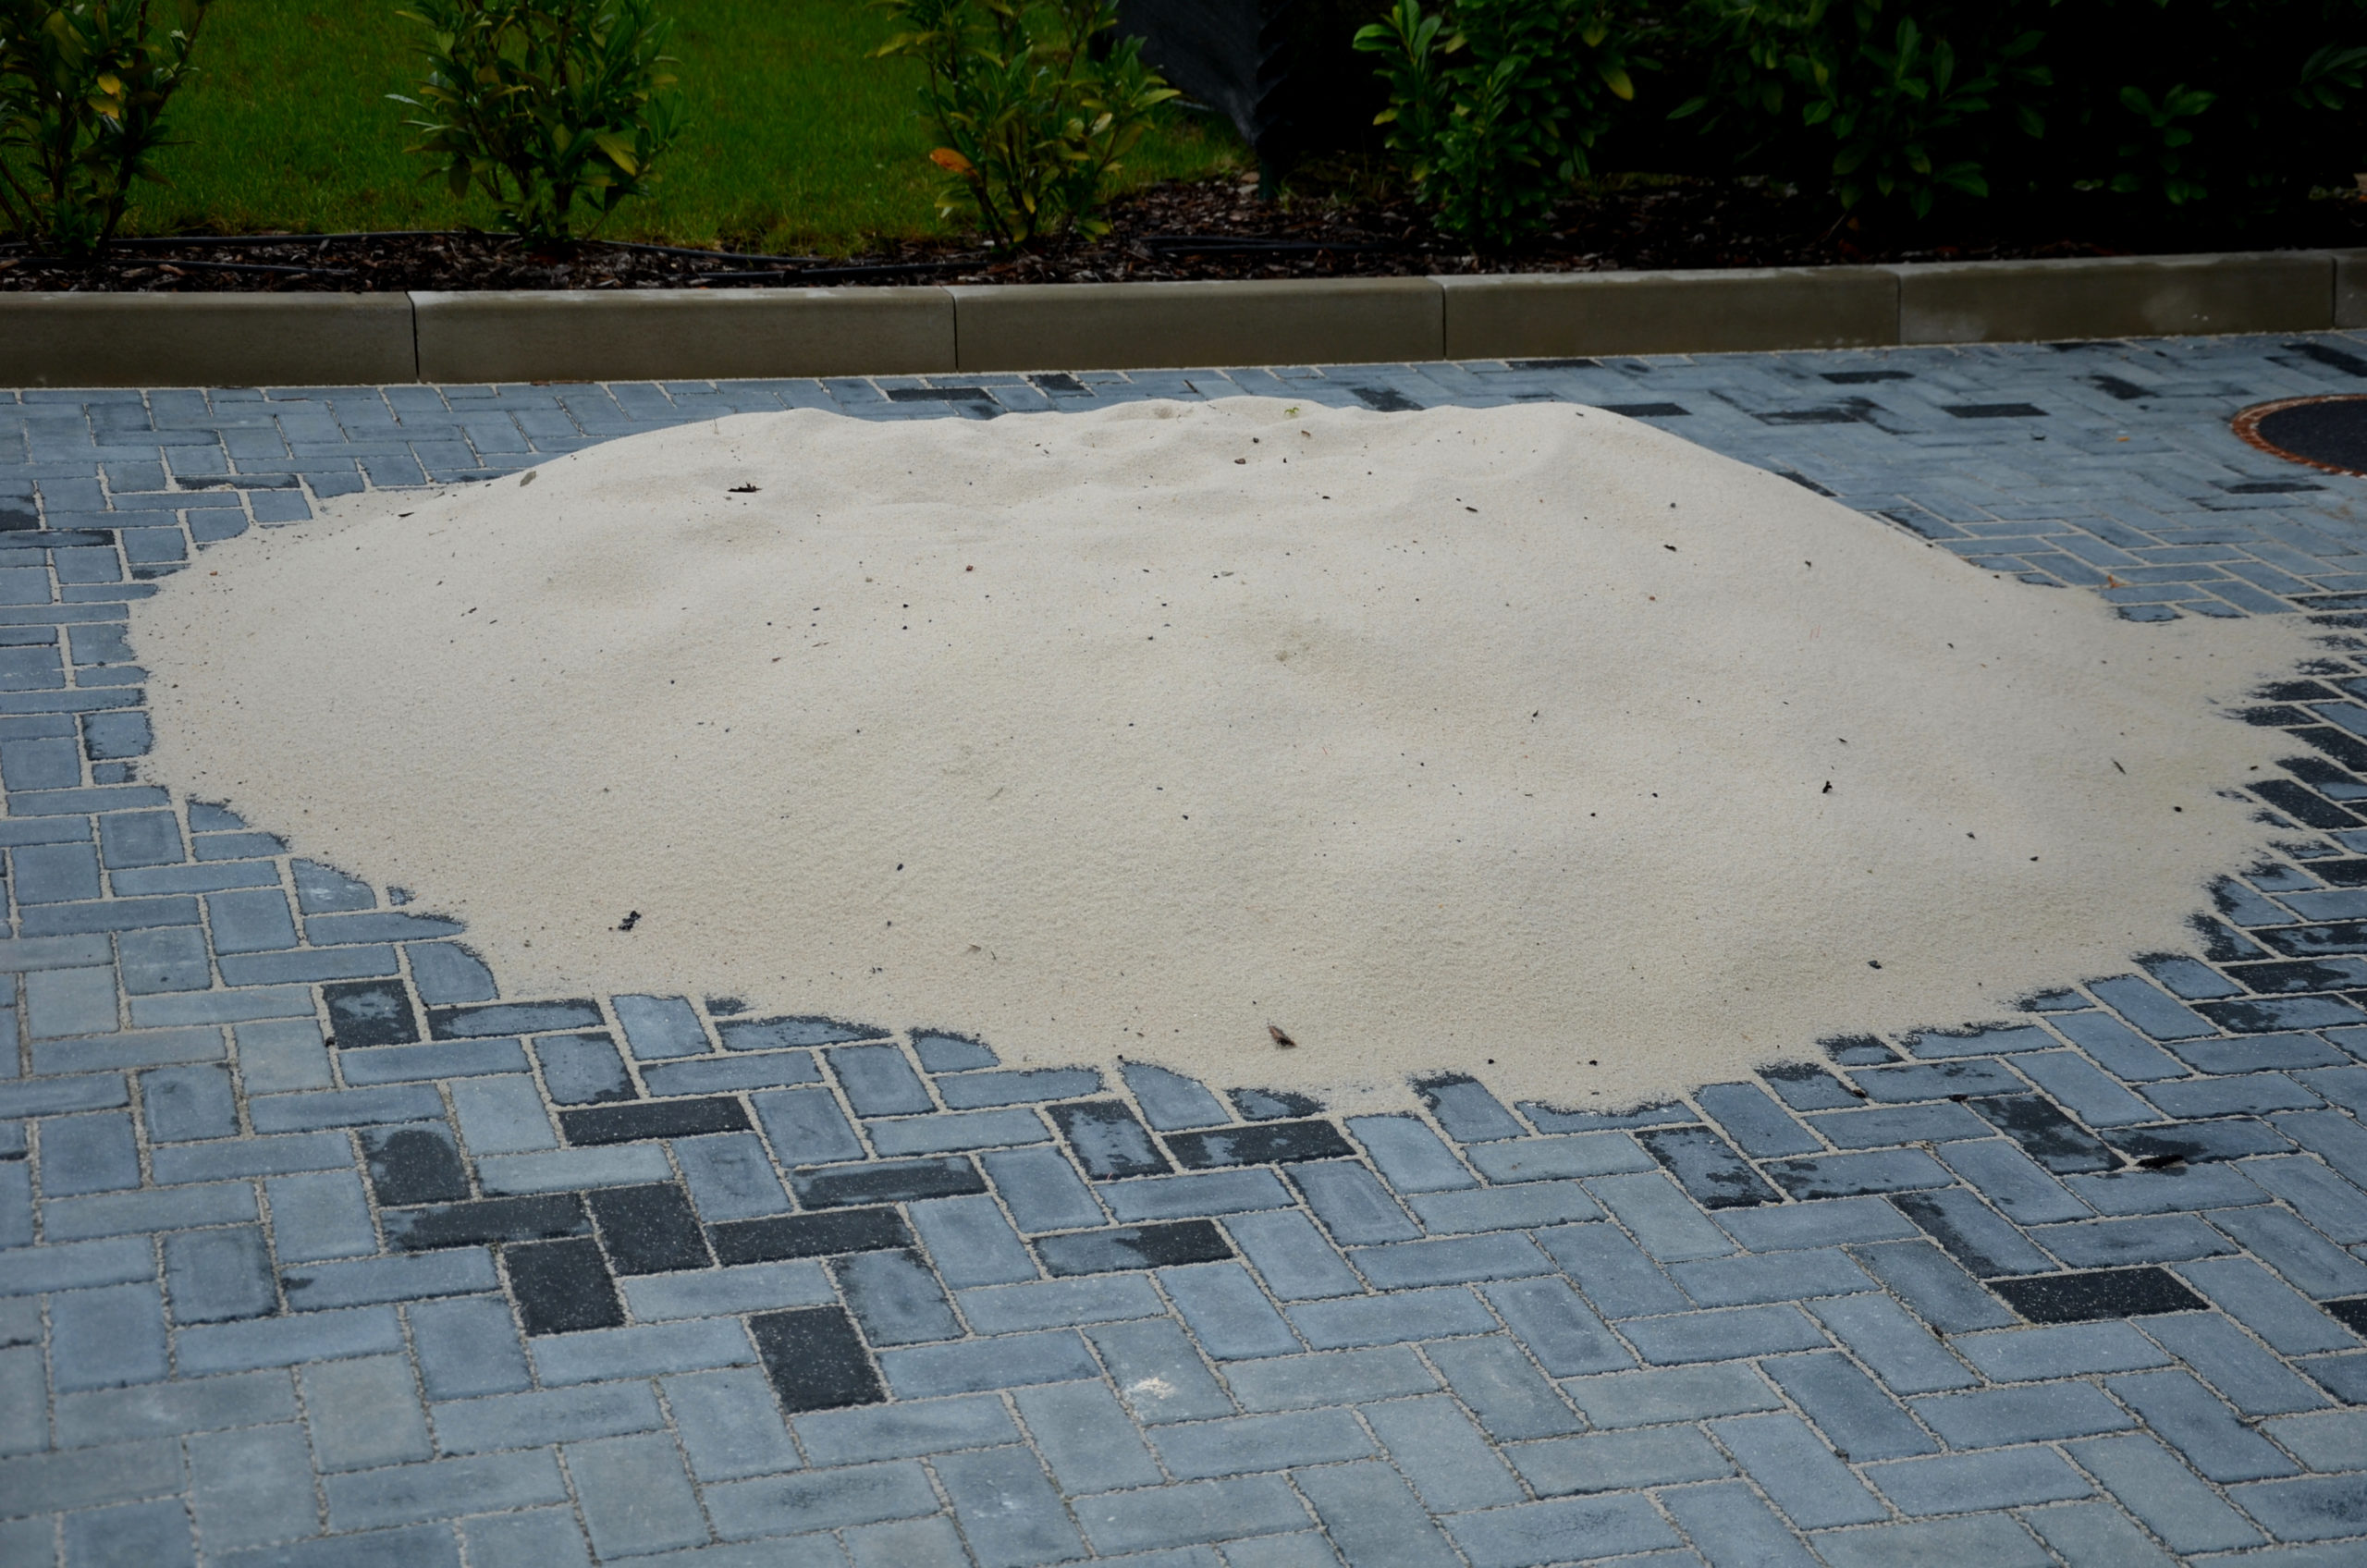 A pile of silica sand rests on concrete pavement.